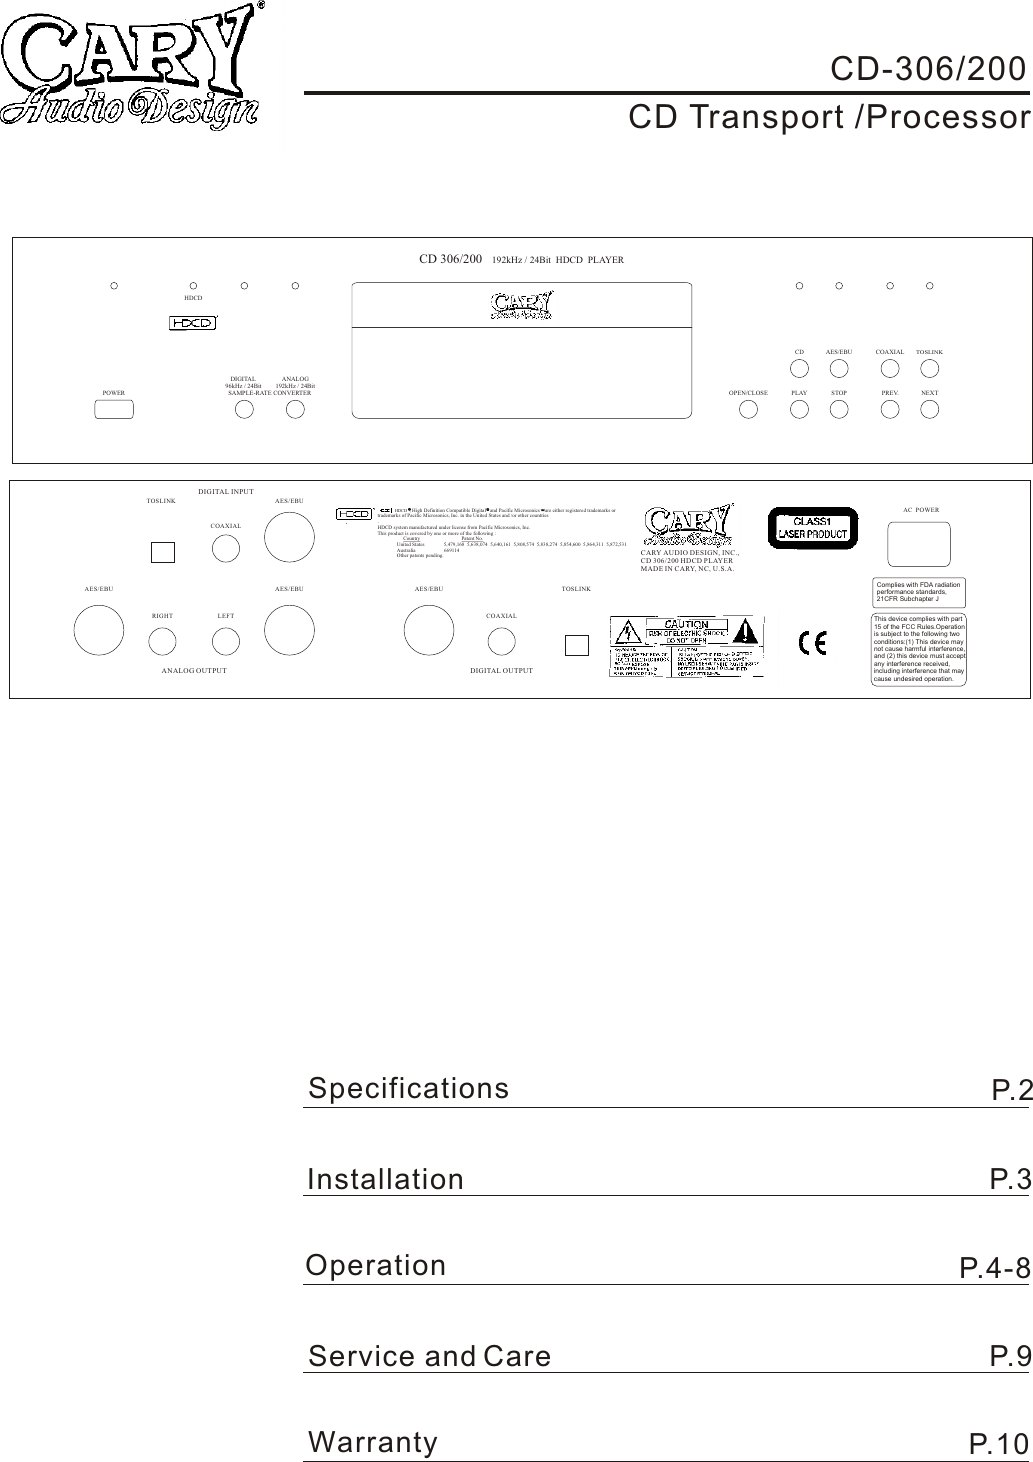 Page 2 of 12 - Cary-Audio-Design Cary-Audio-Design-Cd-200-Users-Manual- CD 306/200 Operating Manual  Cary-audio-design-cd-200-users-manual